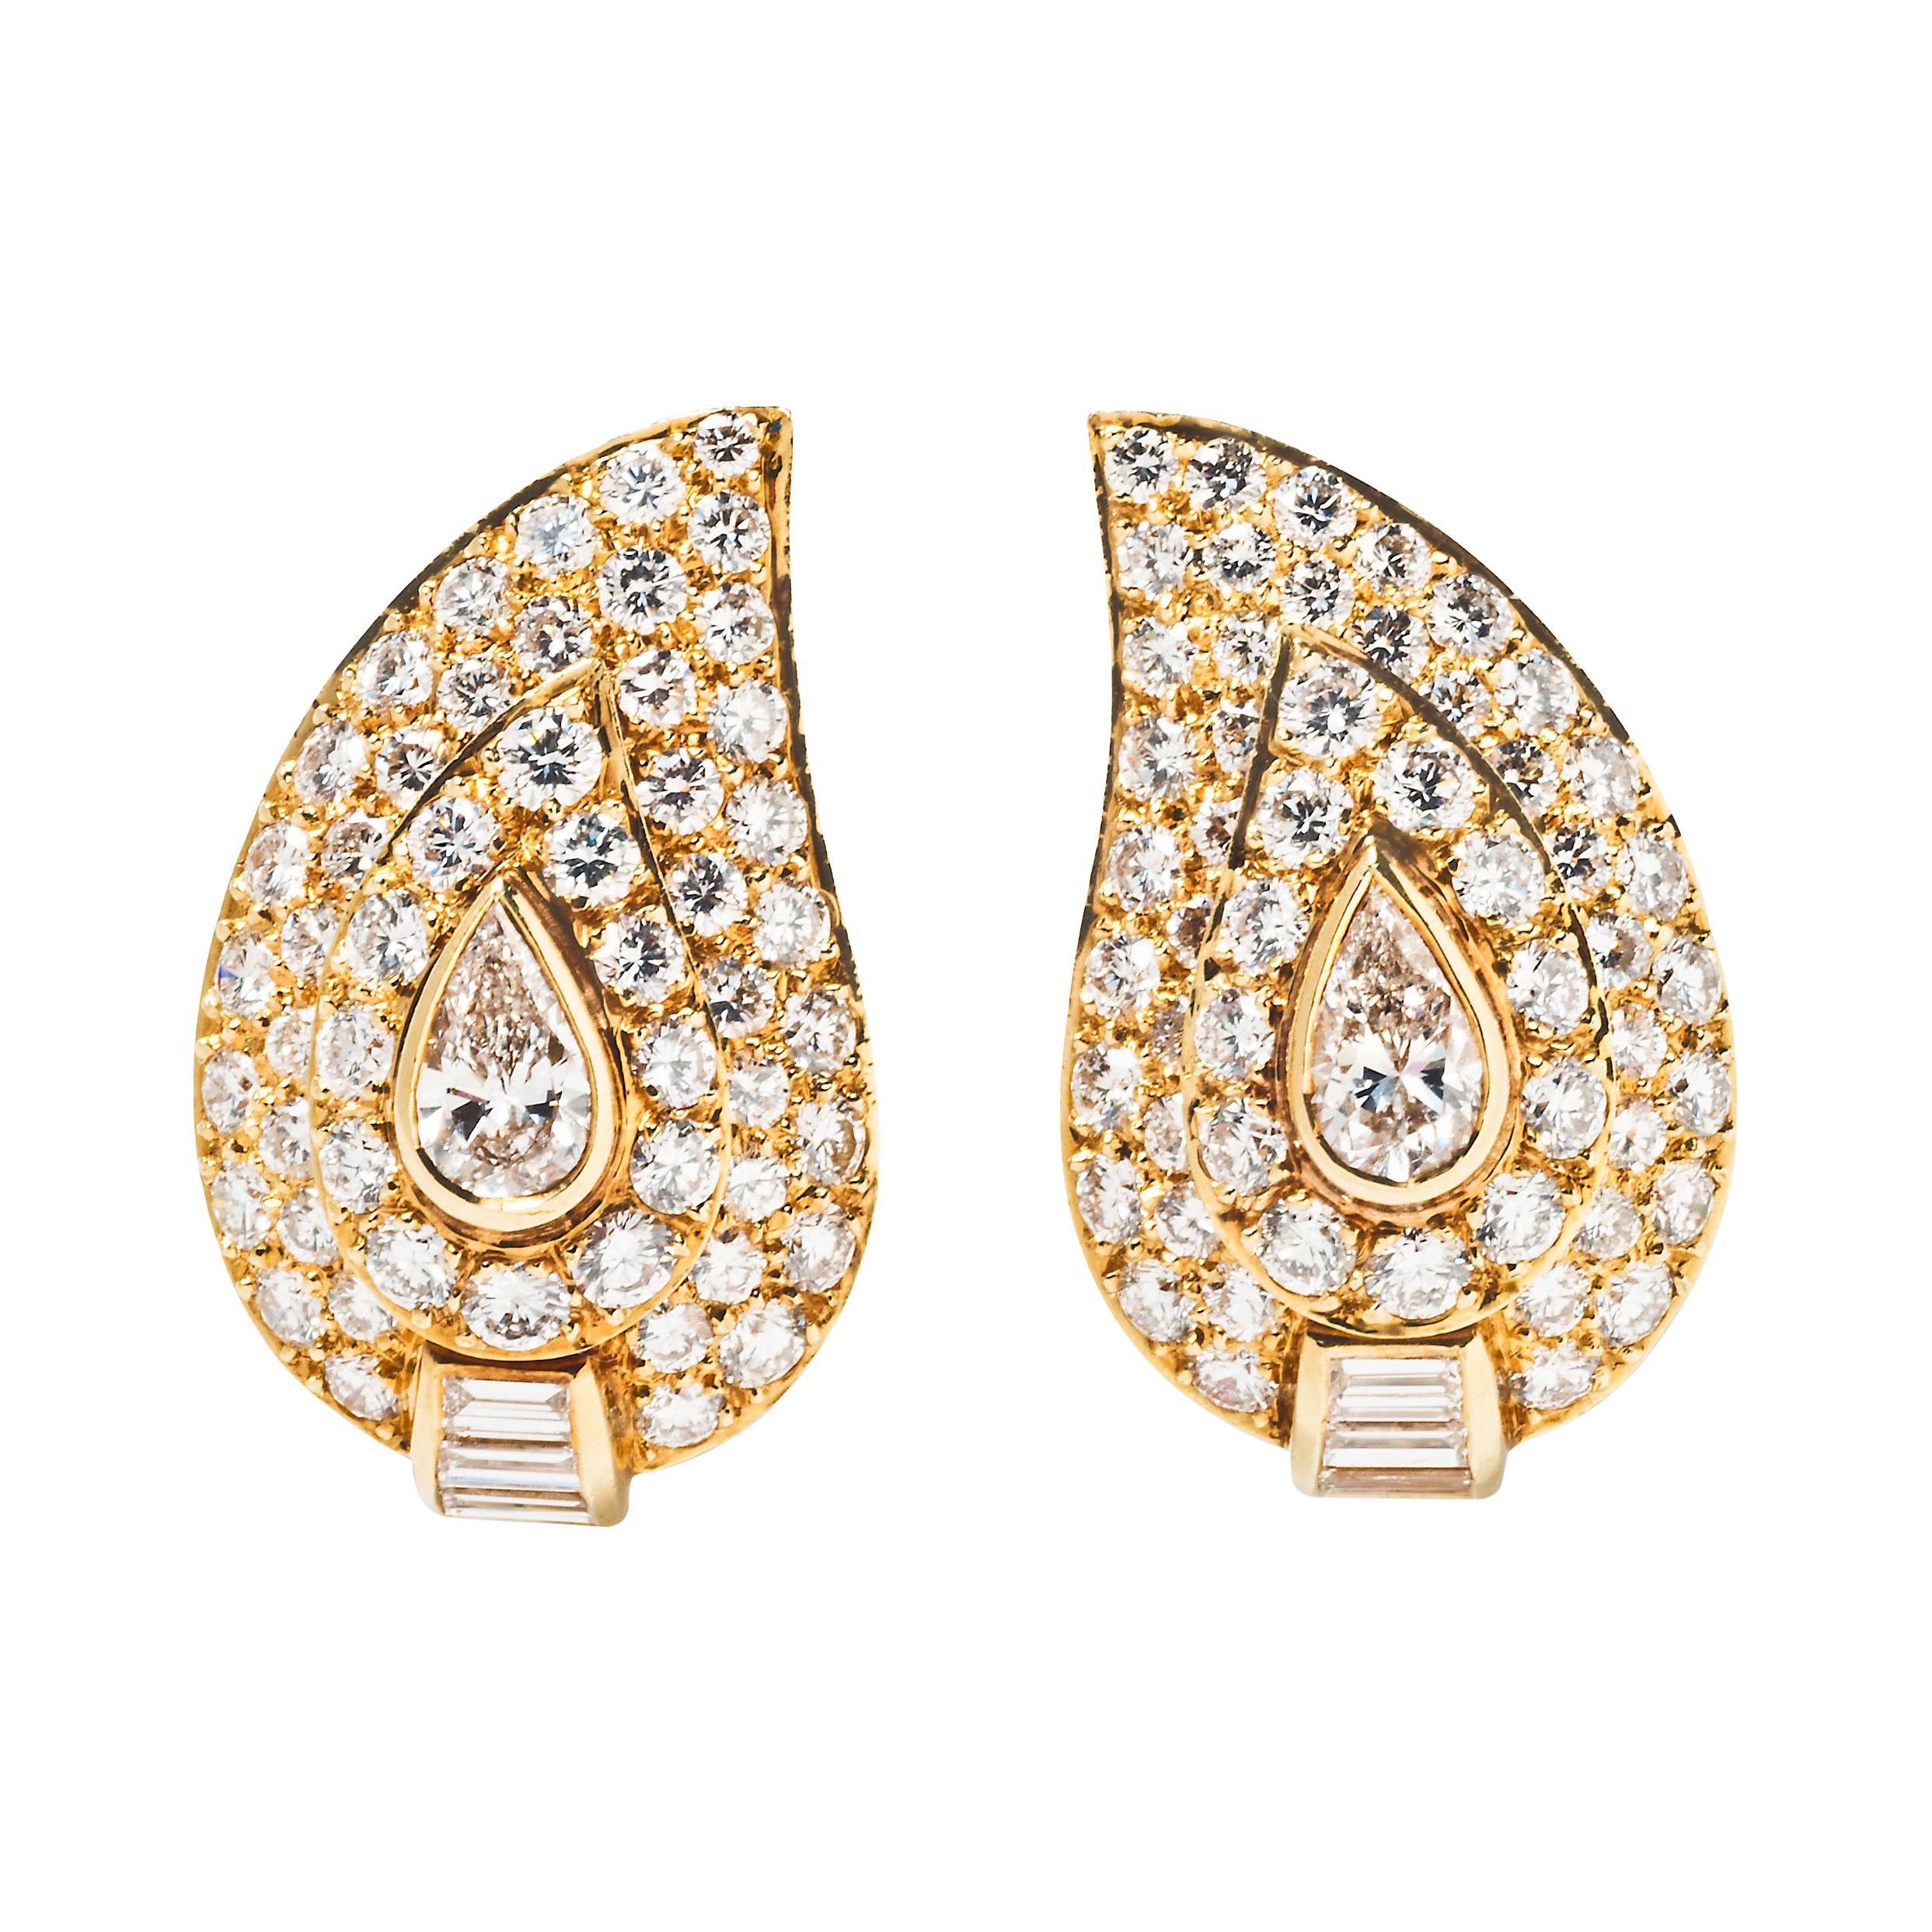 Van Cleef & Arpels Diamond and 18k Gold Ear Clips